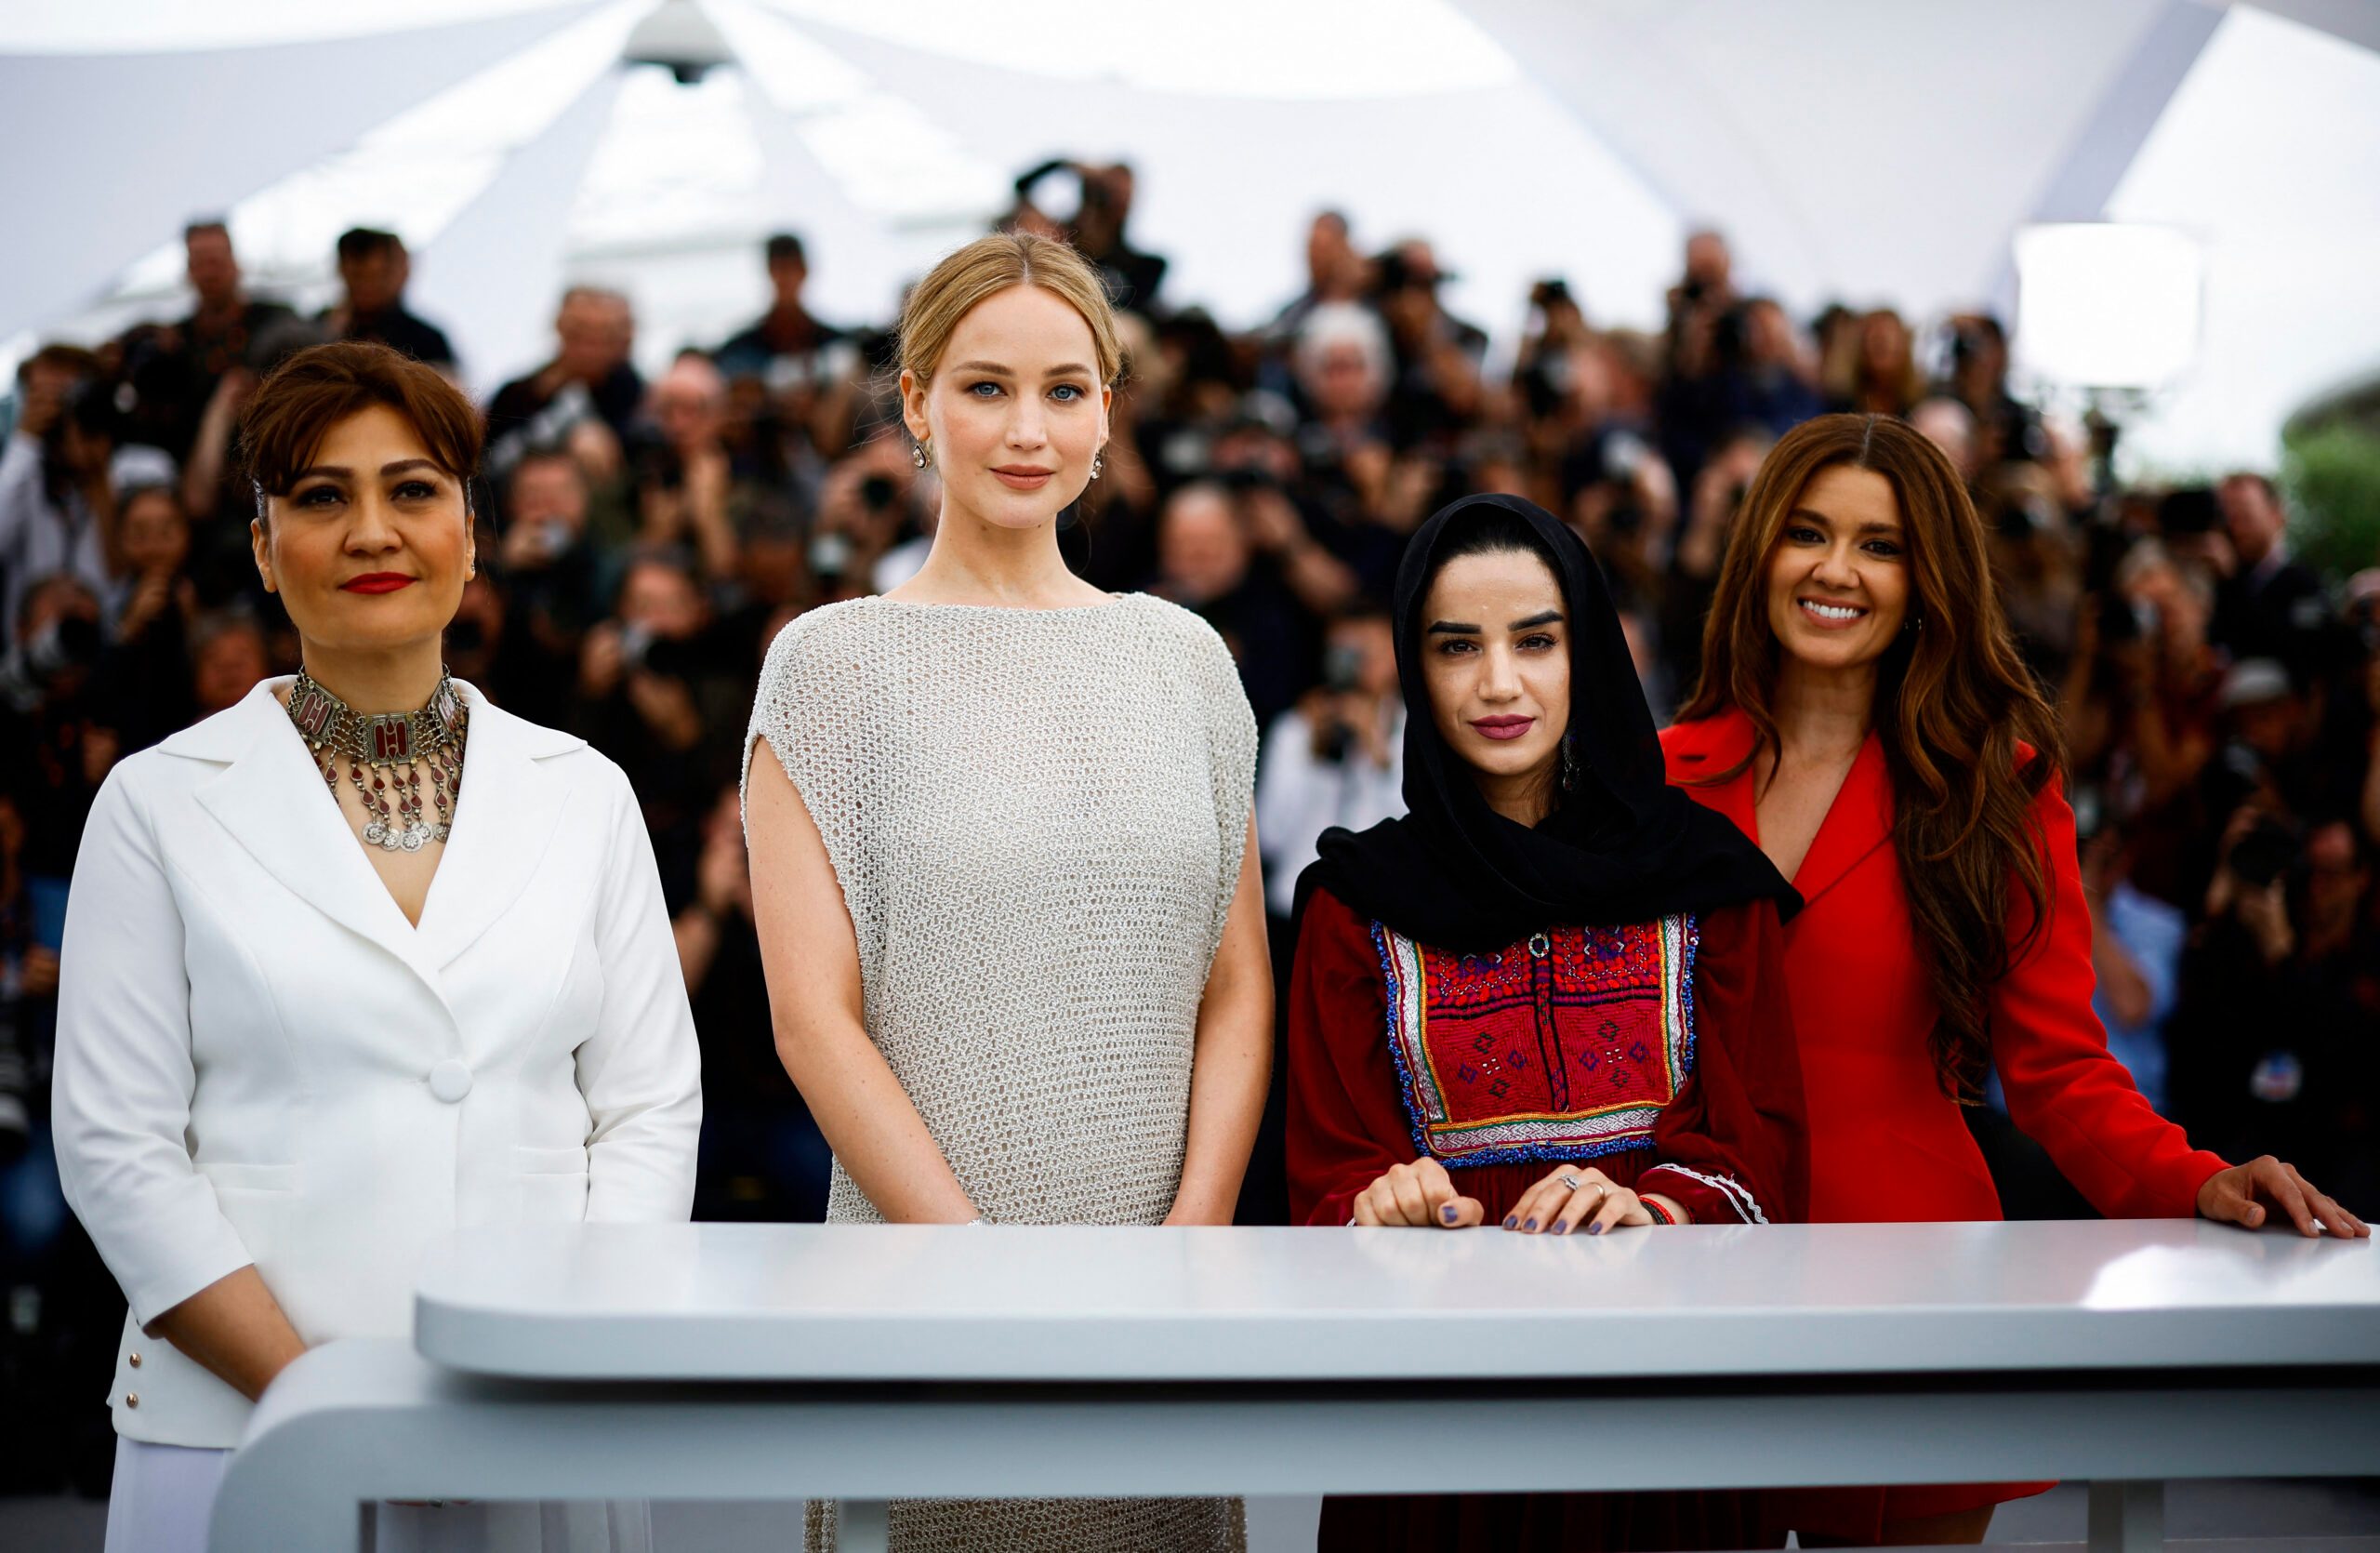 Jennifer Lawrence-produced Afghan documentary premieres at Cannes